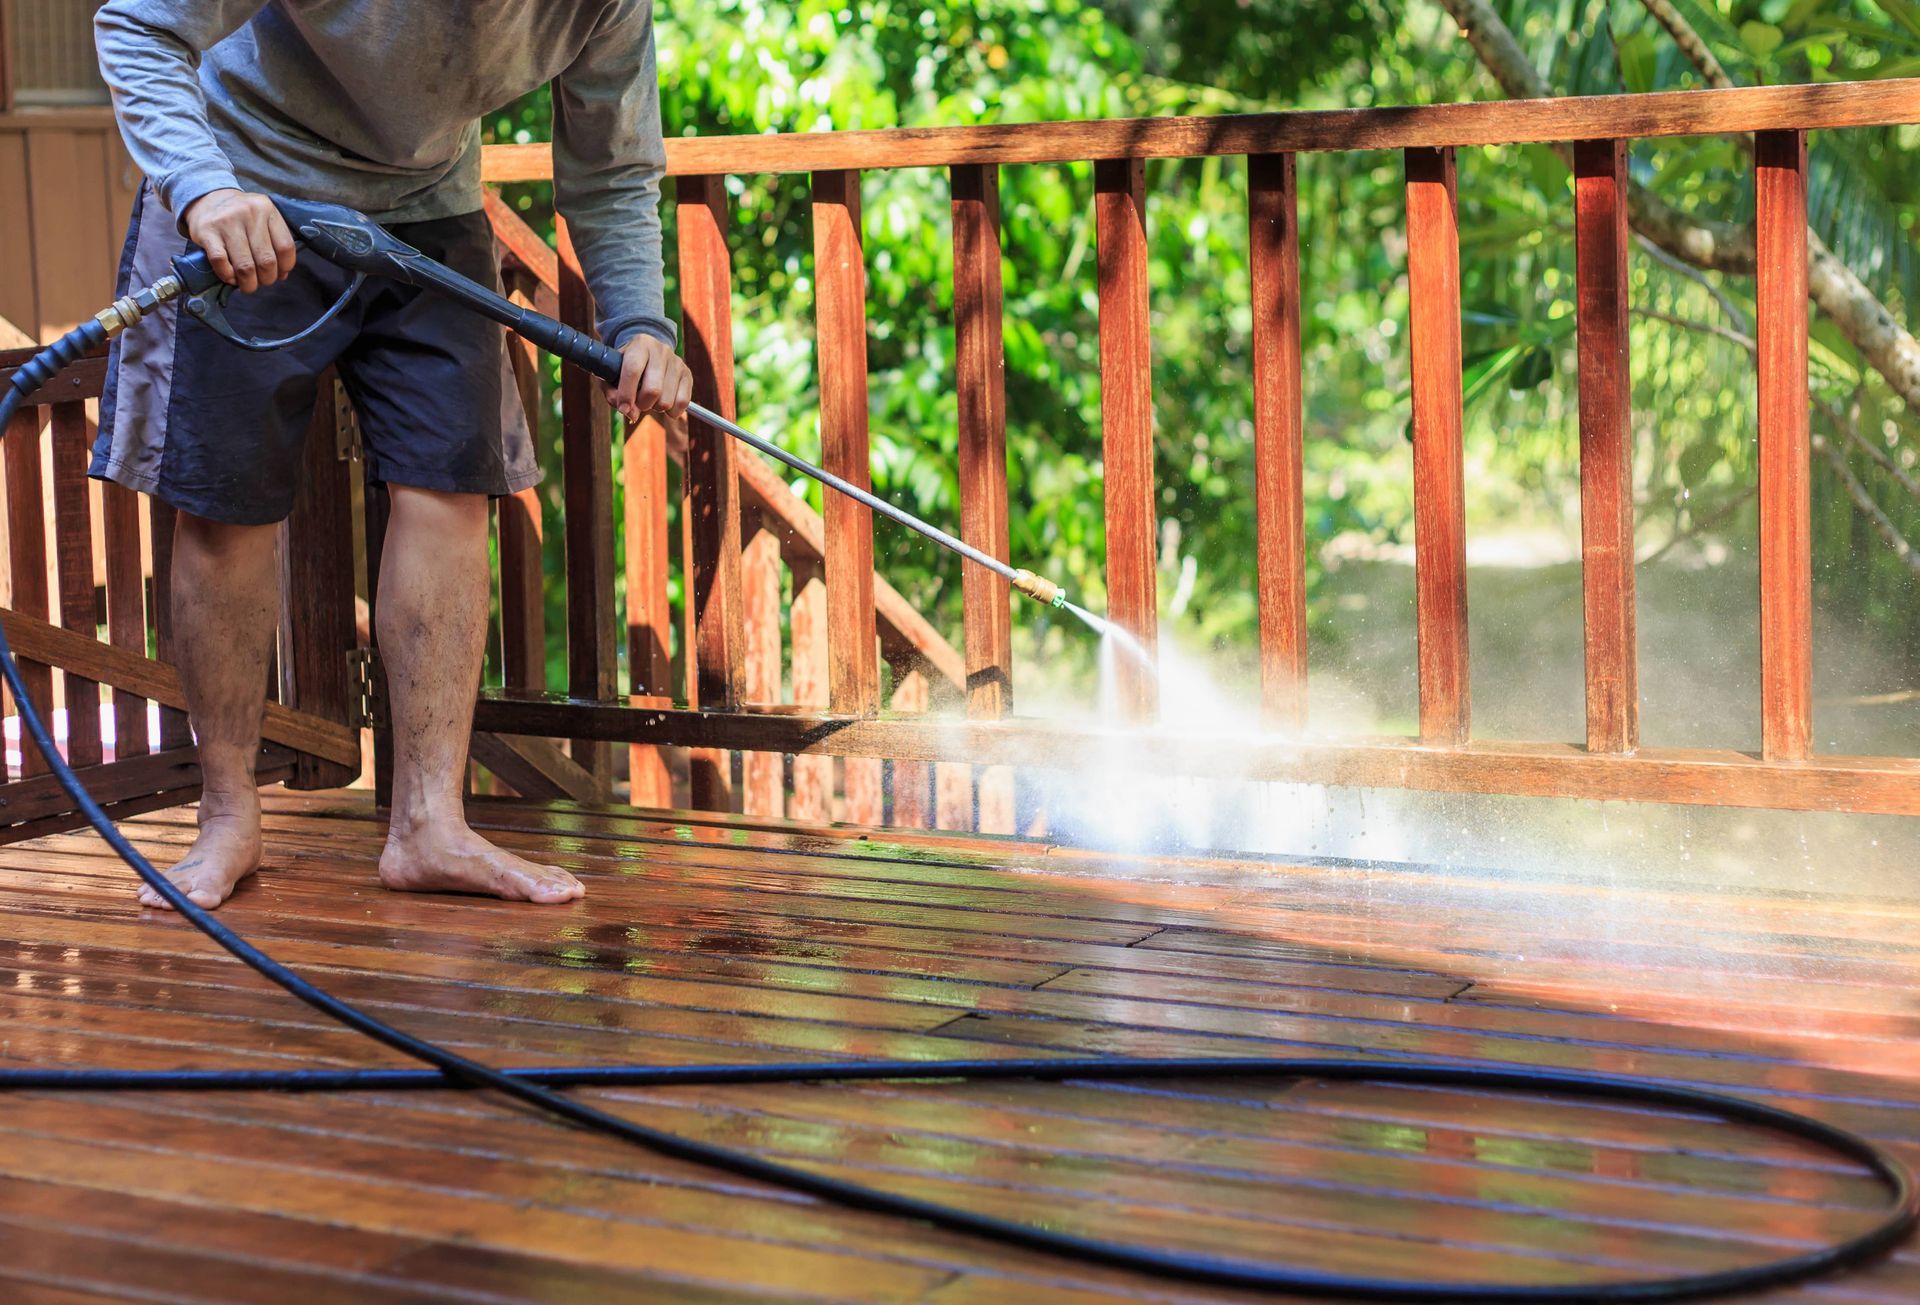 Deck cleaning with power washer.